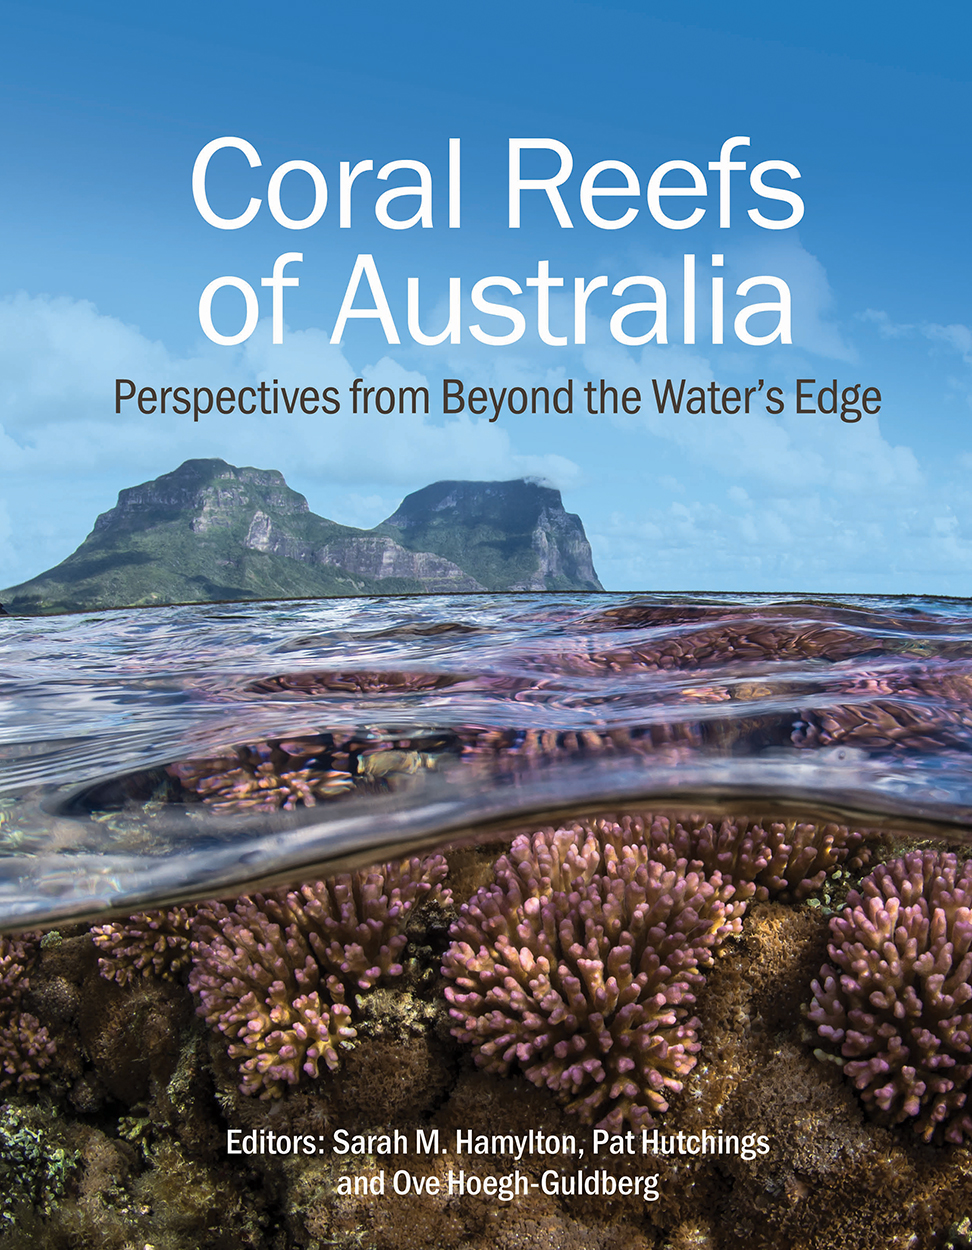 Cover of 'Coral Reefs of Australia', featuring a photo of a coral reef underwater with an island above the water in the background.